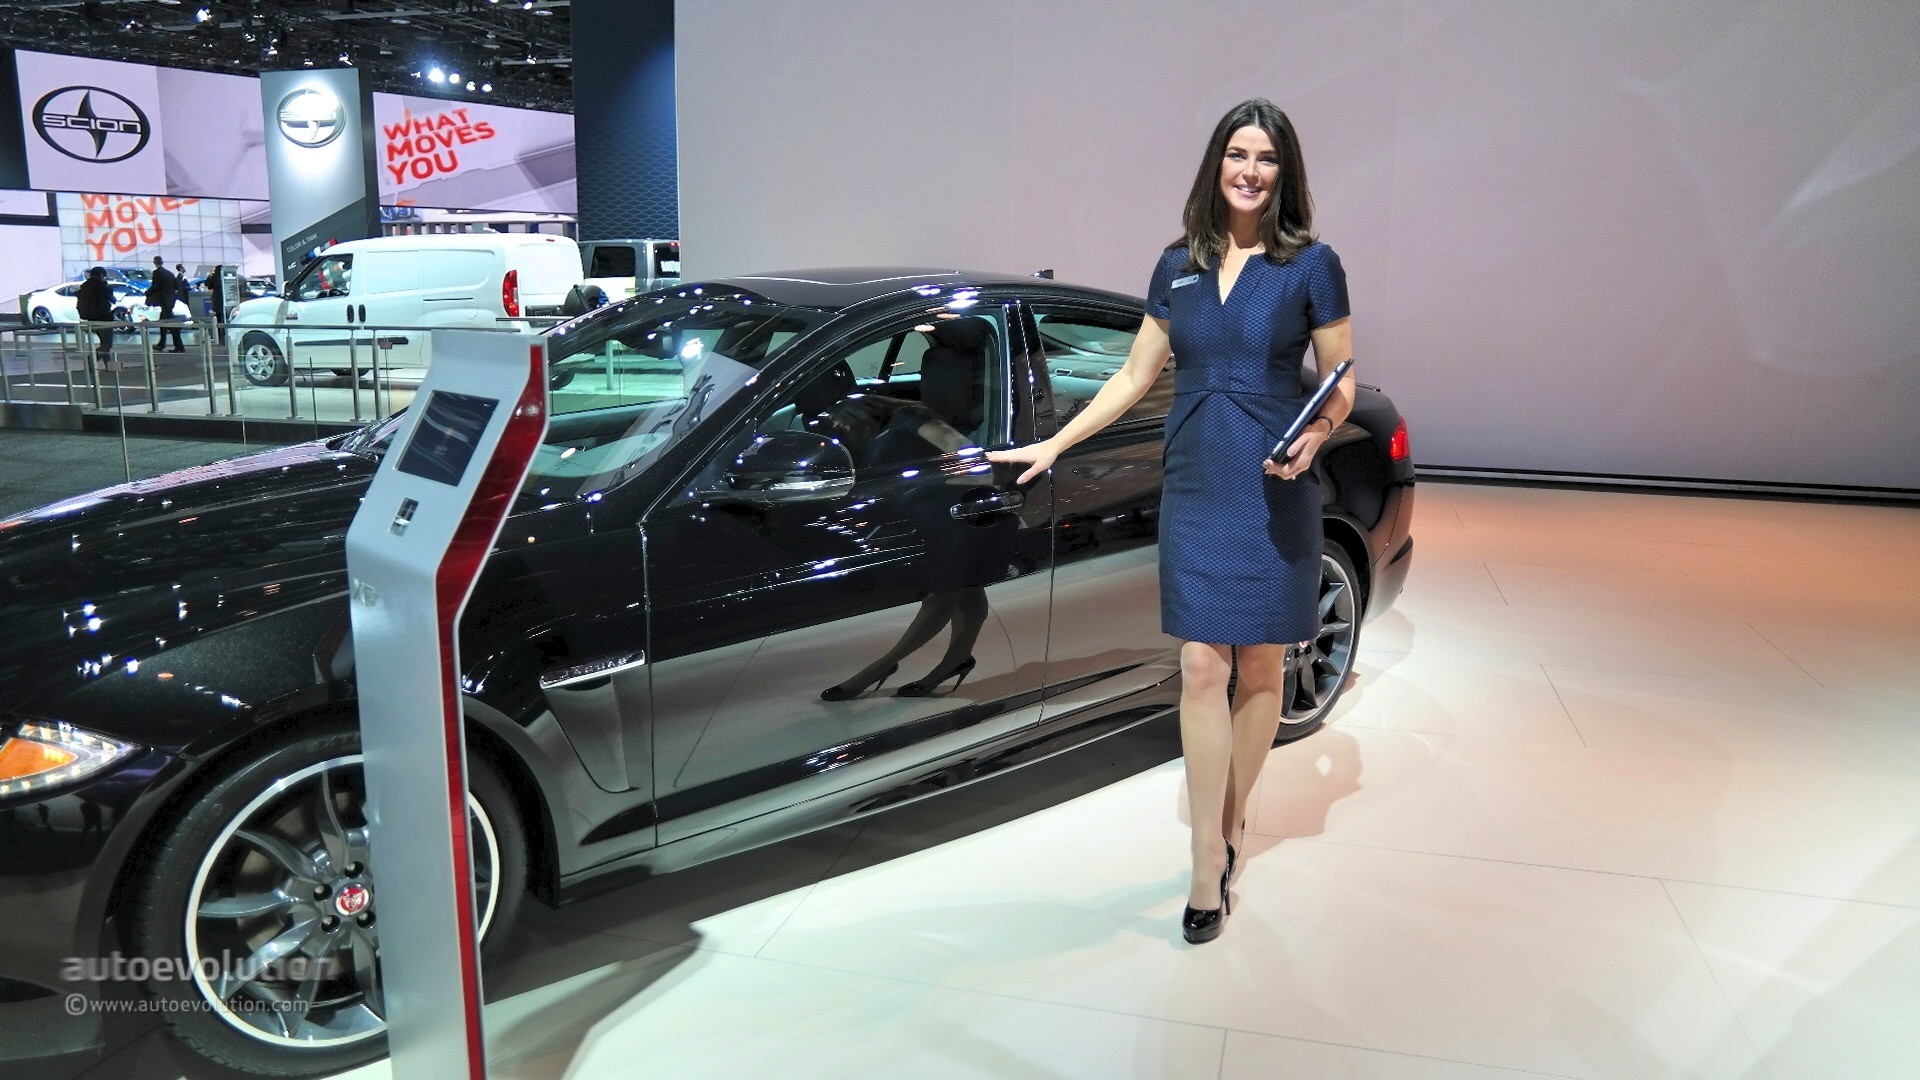 http://s1.cdn.autoevolution.com/images/news/gallery/girls-of-the-2015-detroit-auto-show-photo-gallery_23.jpg